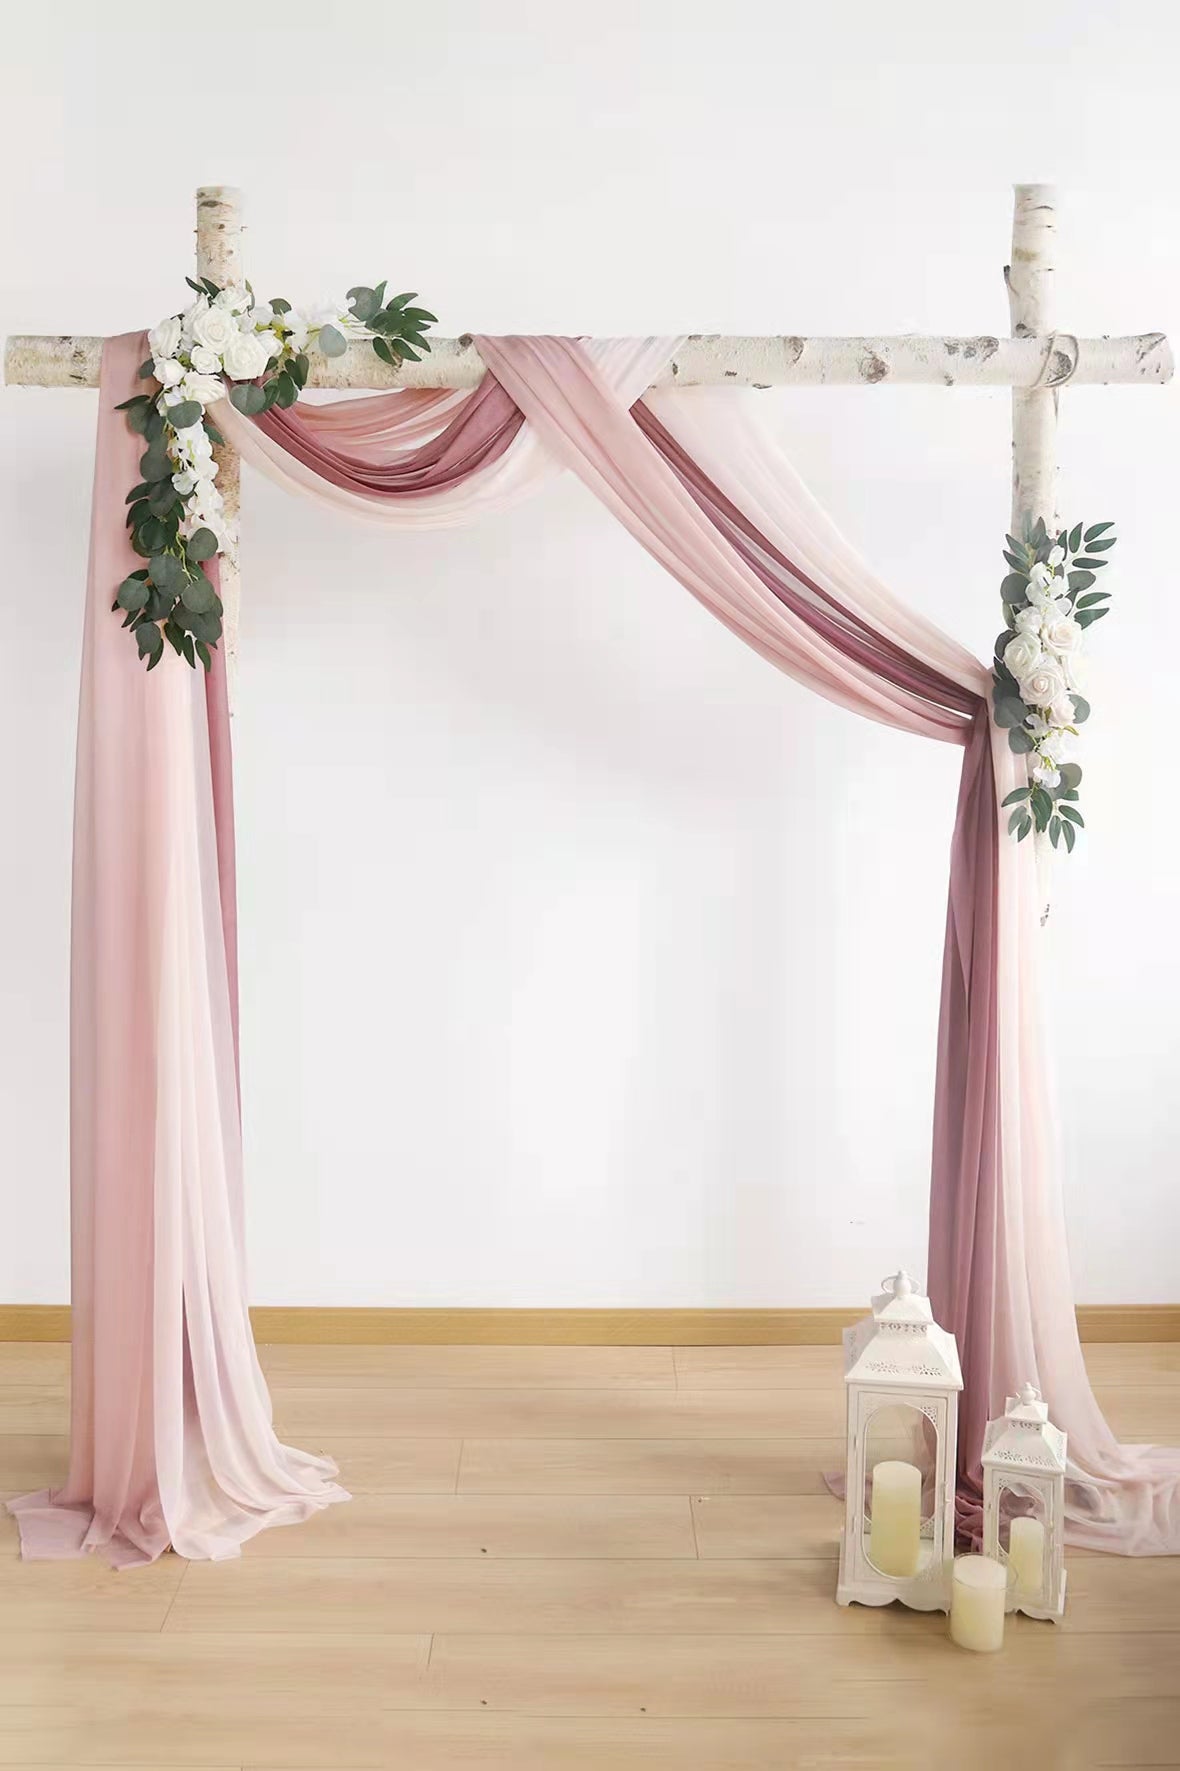 Wedding Arch Flowers  Flower Arch Decor with Drapes - Dusty Rose